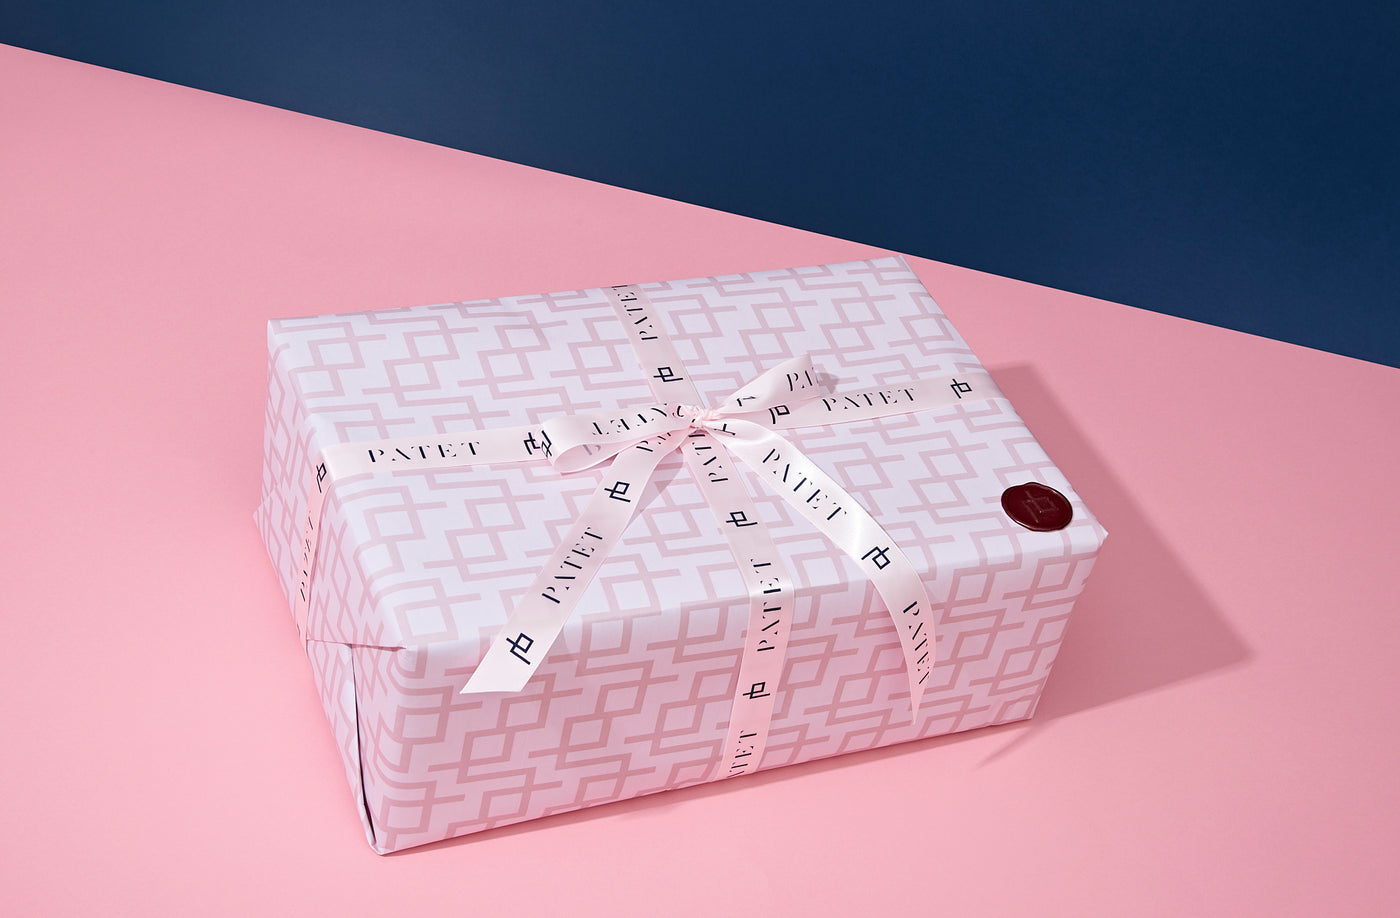 Louis Vuitton Pink Gift Wrapping Supplies